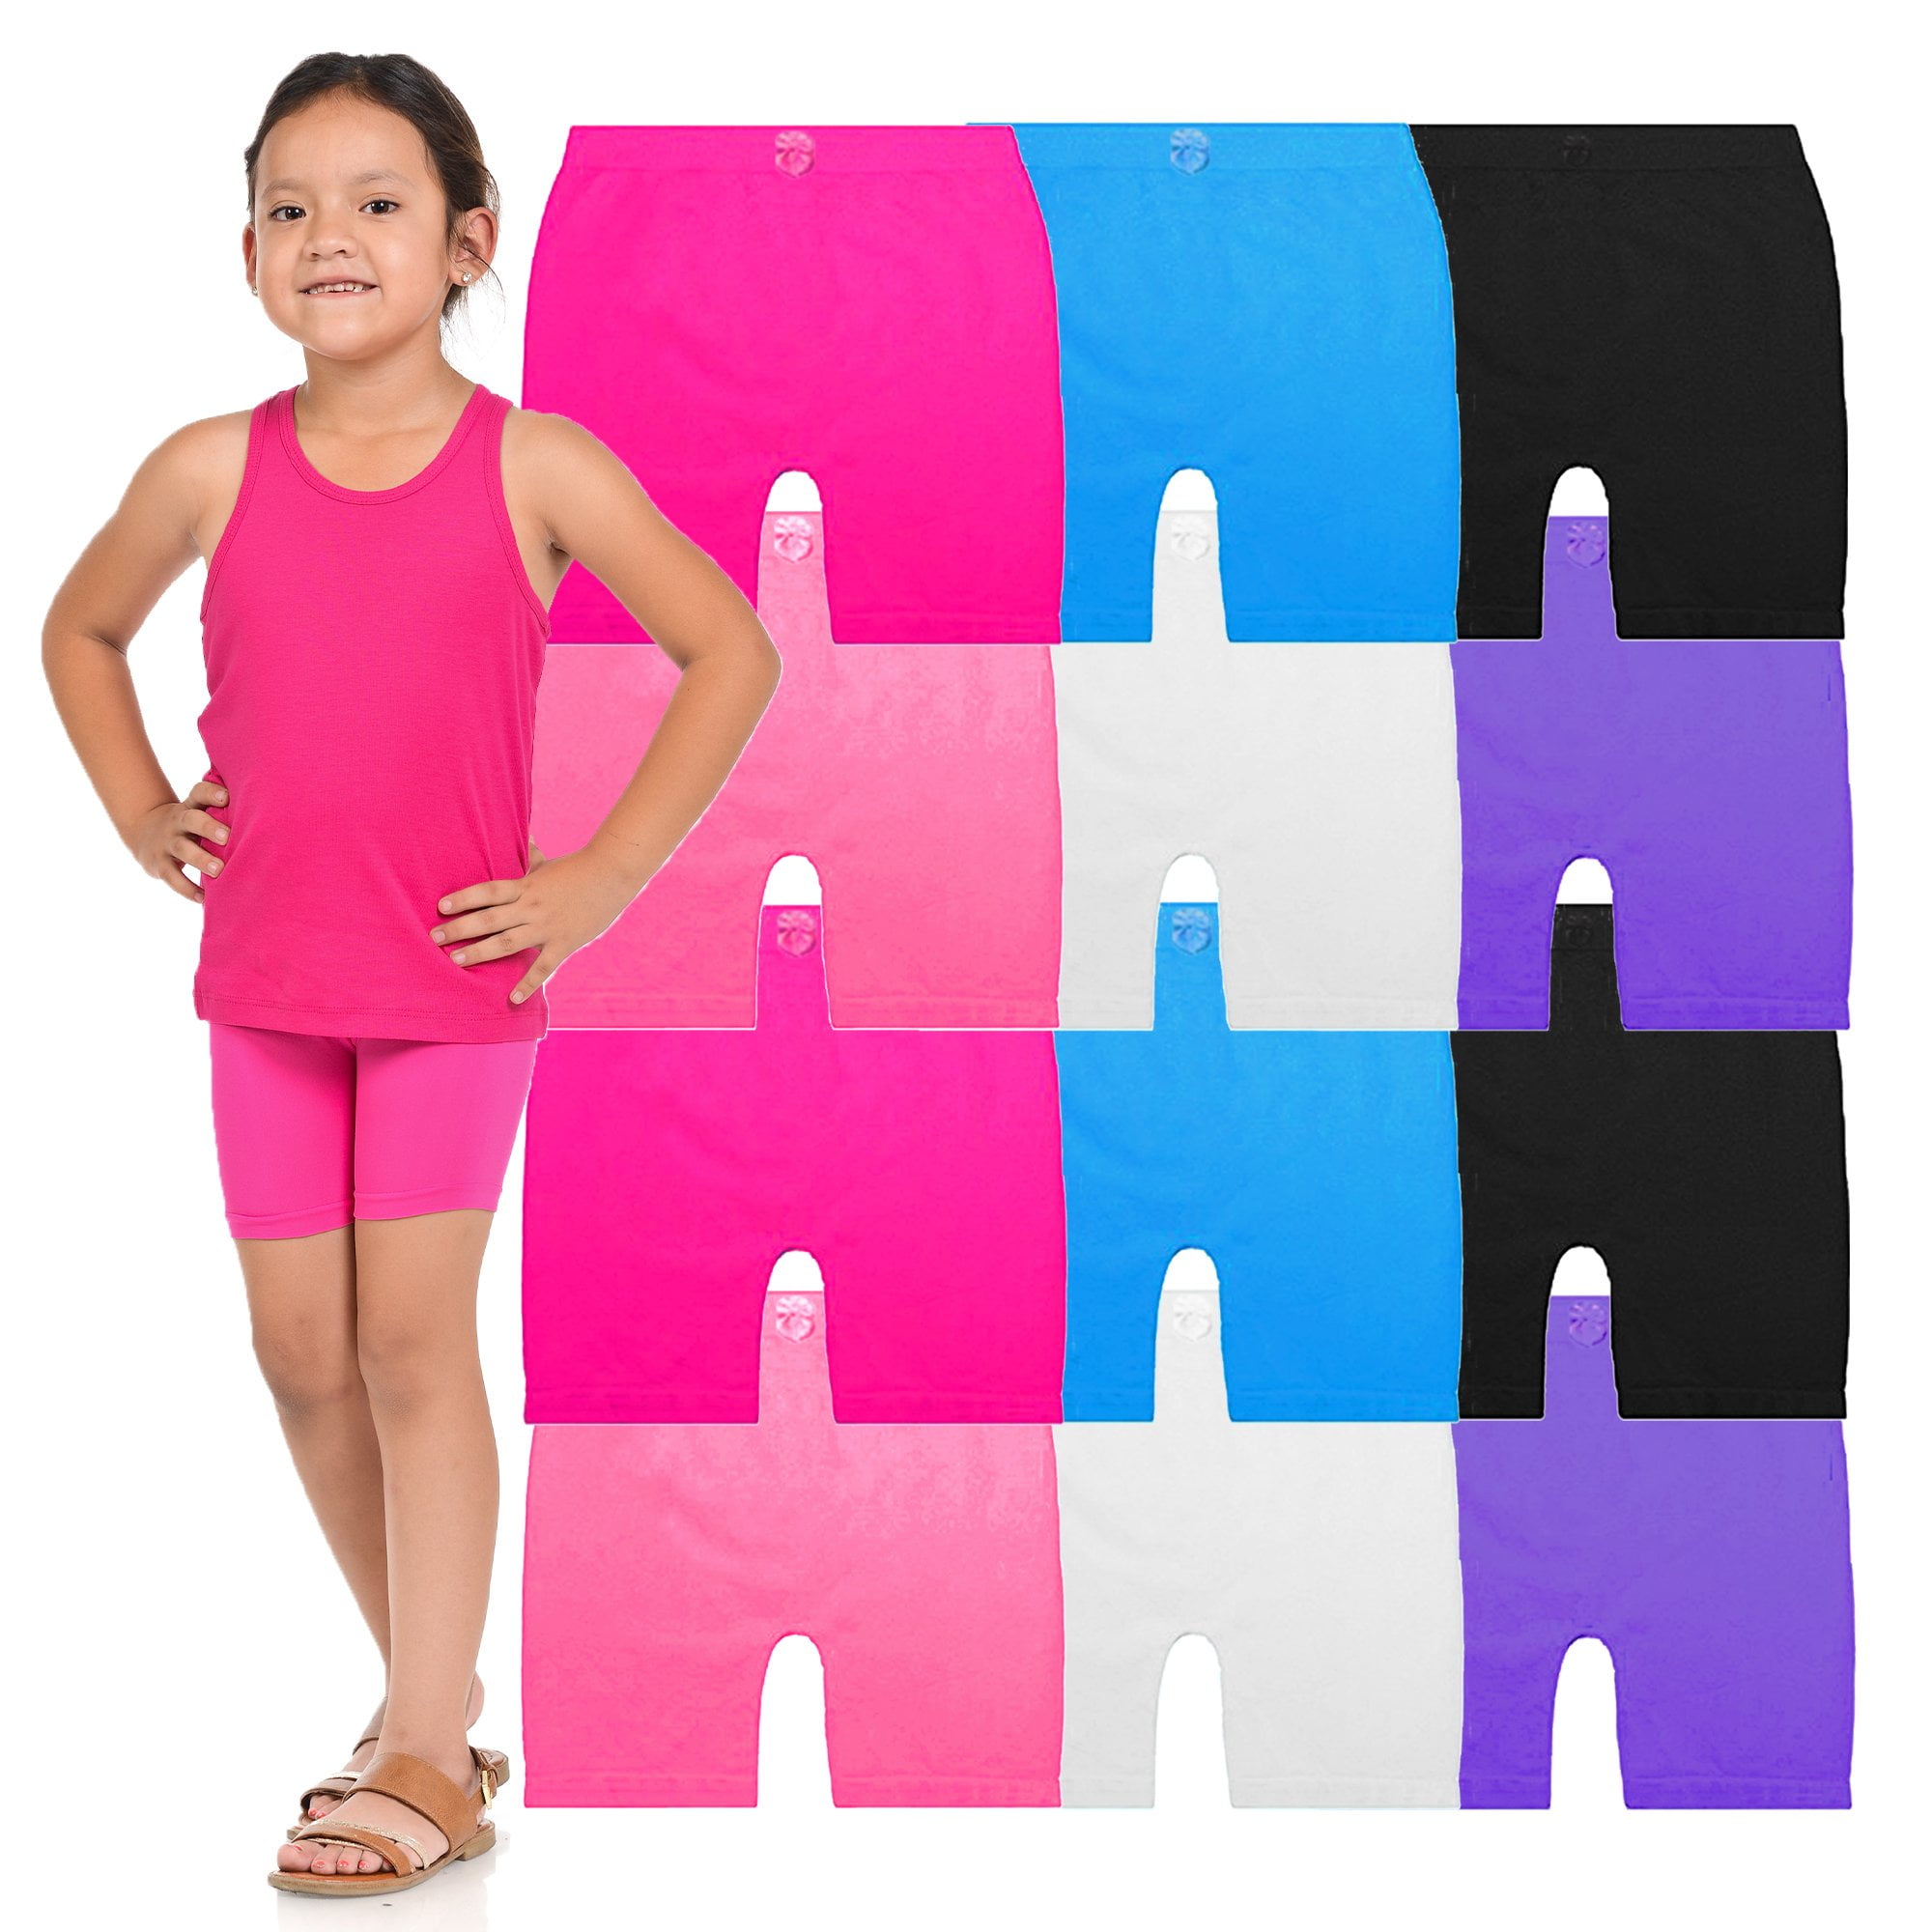 BASICO Girls Dance, Bike Shorts 12 Value Packs - for Sports, Play or Under  Skirts Dress with Ribbon (Large Size 12-14)